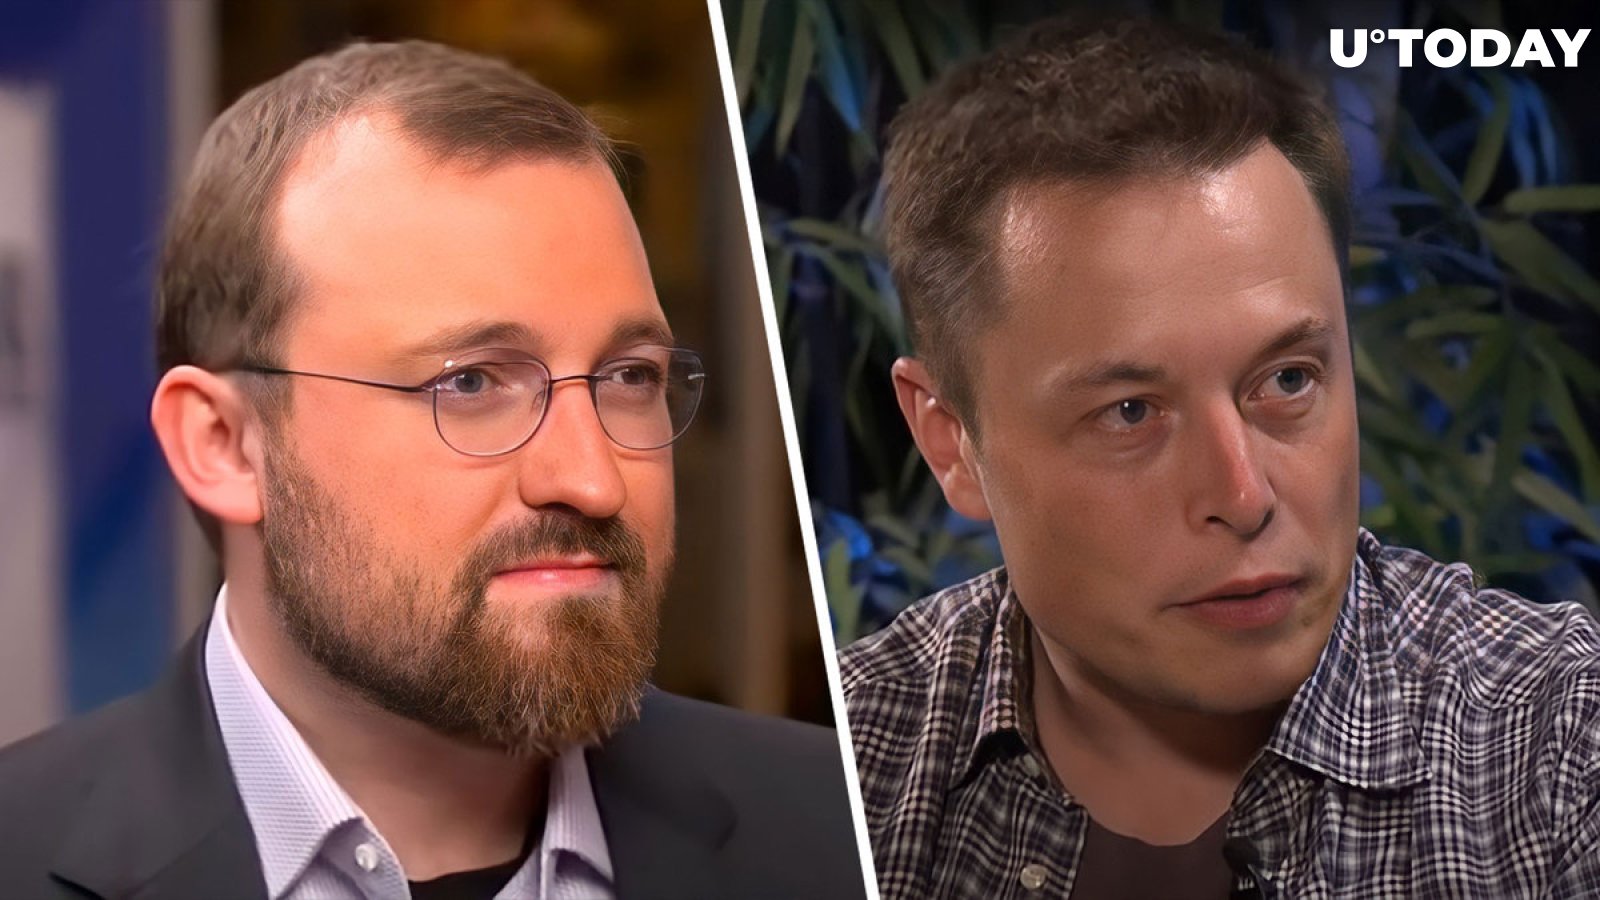 Charles Hoskinson Can't Wait for Elon Musk to Take Over Twitter, Here's Why